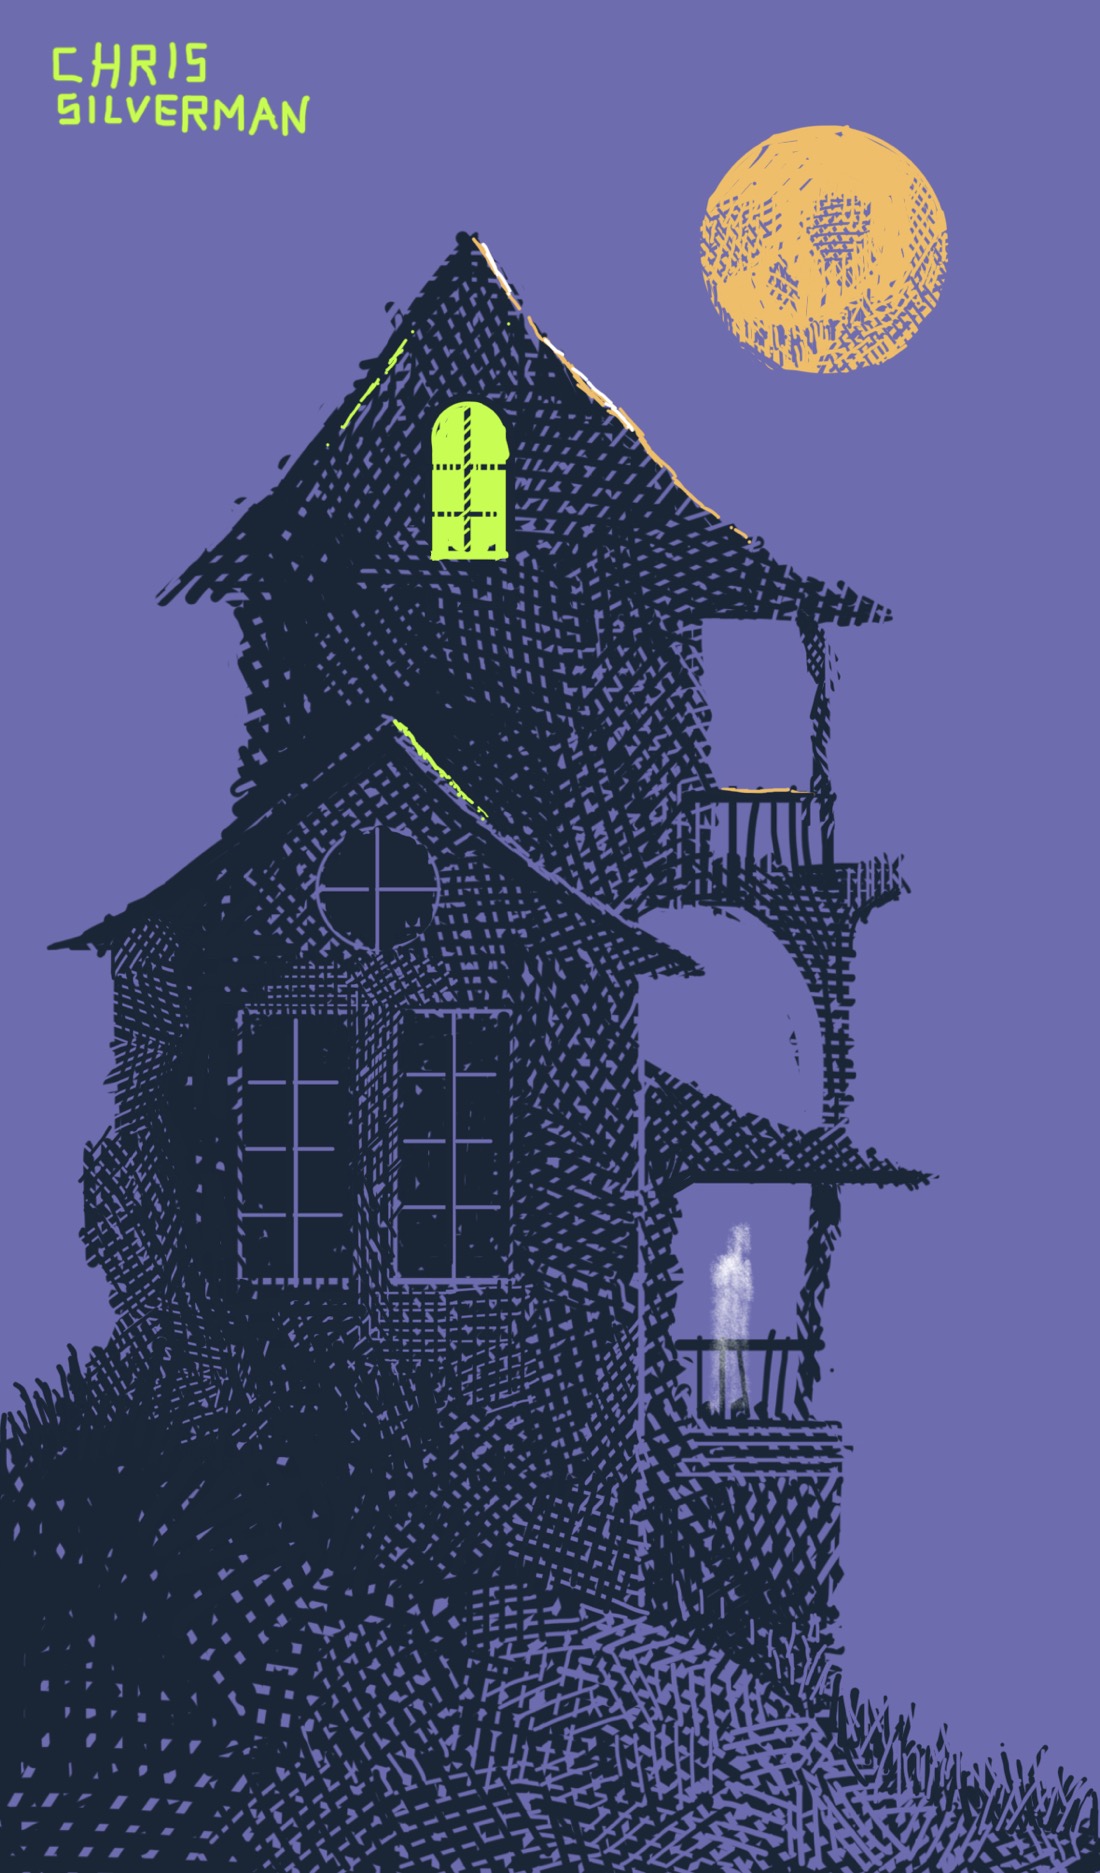 A spooky house. The house is tall and thin—"spindly" might be a better word—with at least three stories, and two covered porches, one above the other. The architecture is almost cartoonish: curvy and warped. Most of the windows are dark, except for the very top one in the attic, which glows a bright, otherworldly green. Nothing is seen in this window, just the light. Above the house hangs a large, orange moon, the shadows suggesting a skeletal face. On the first-floor covered veranda stands a blurry, translucent white figure.